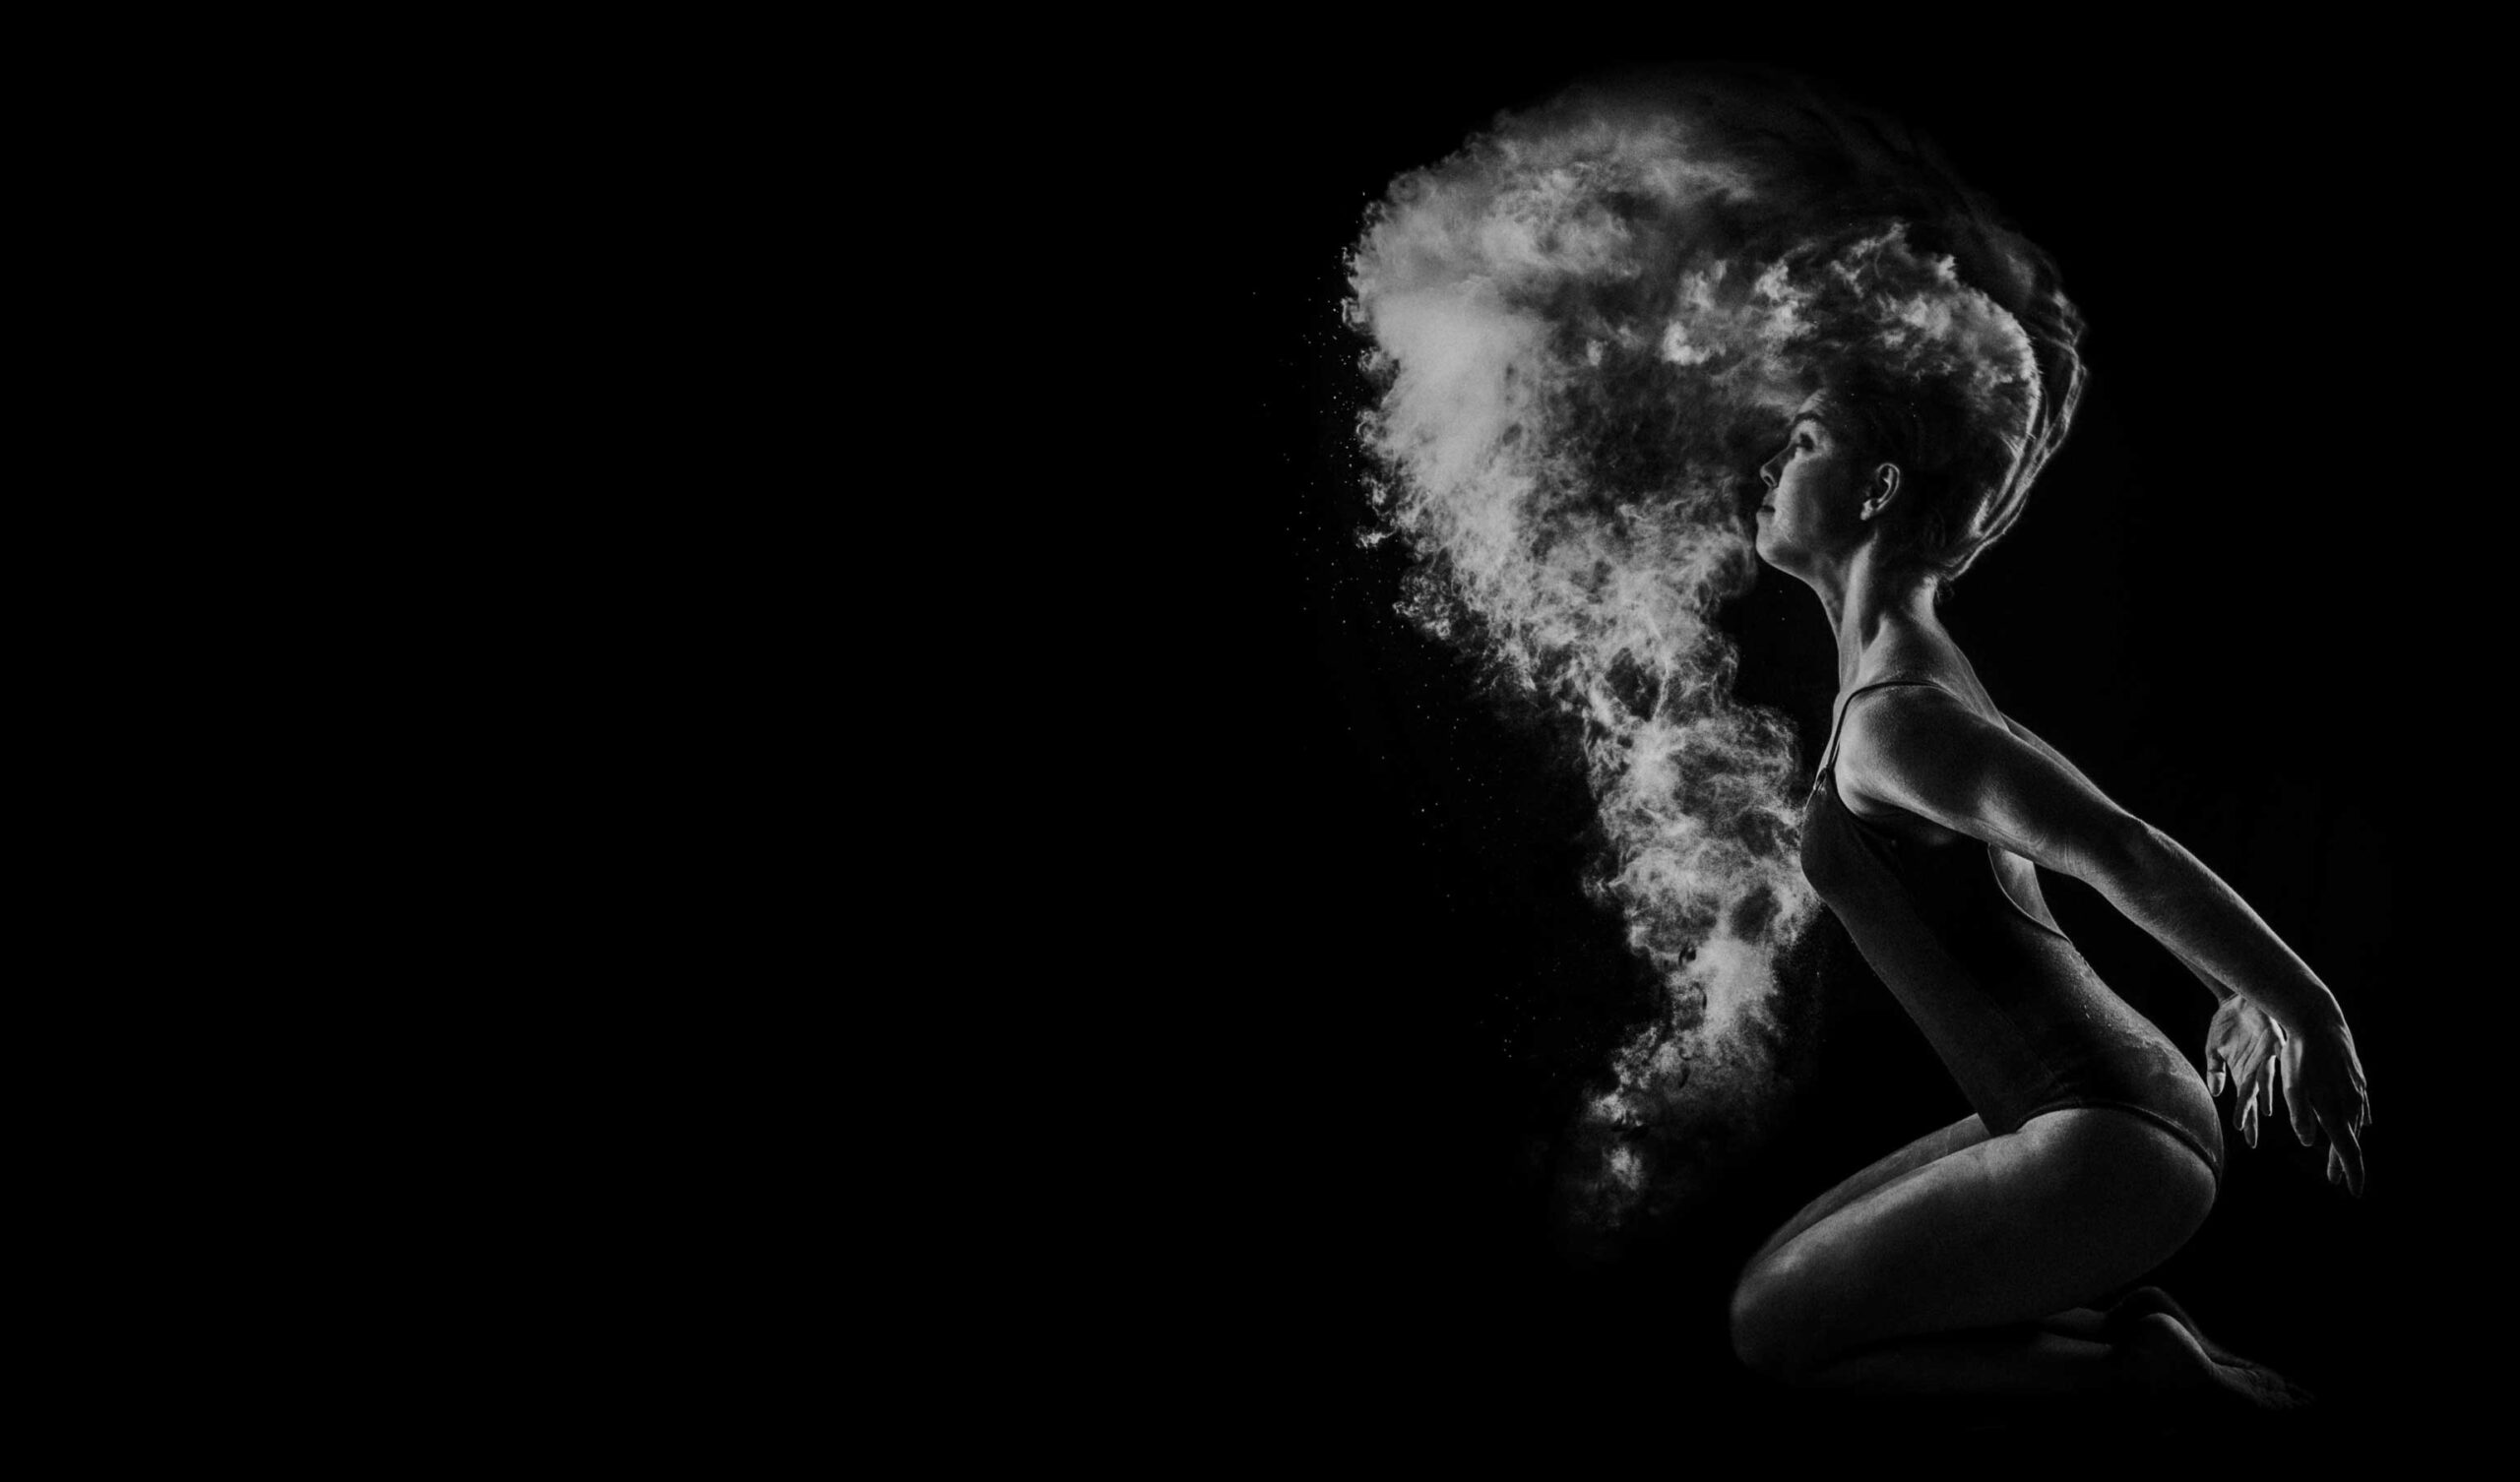 A monochrome image of a woman kneeling and dramatically exhaling a cloud of fine powder, creating a striking contrast against the dark background.